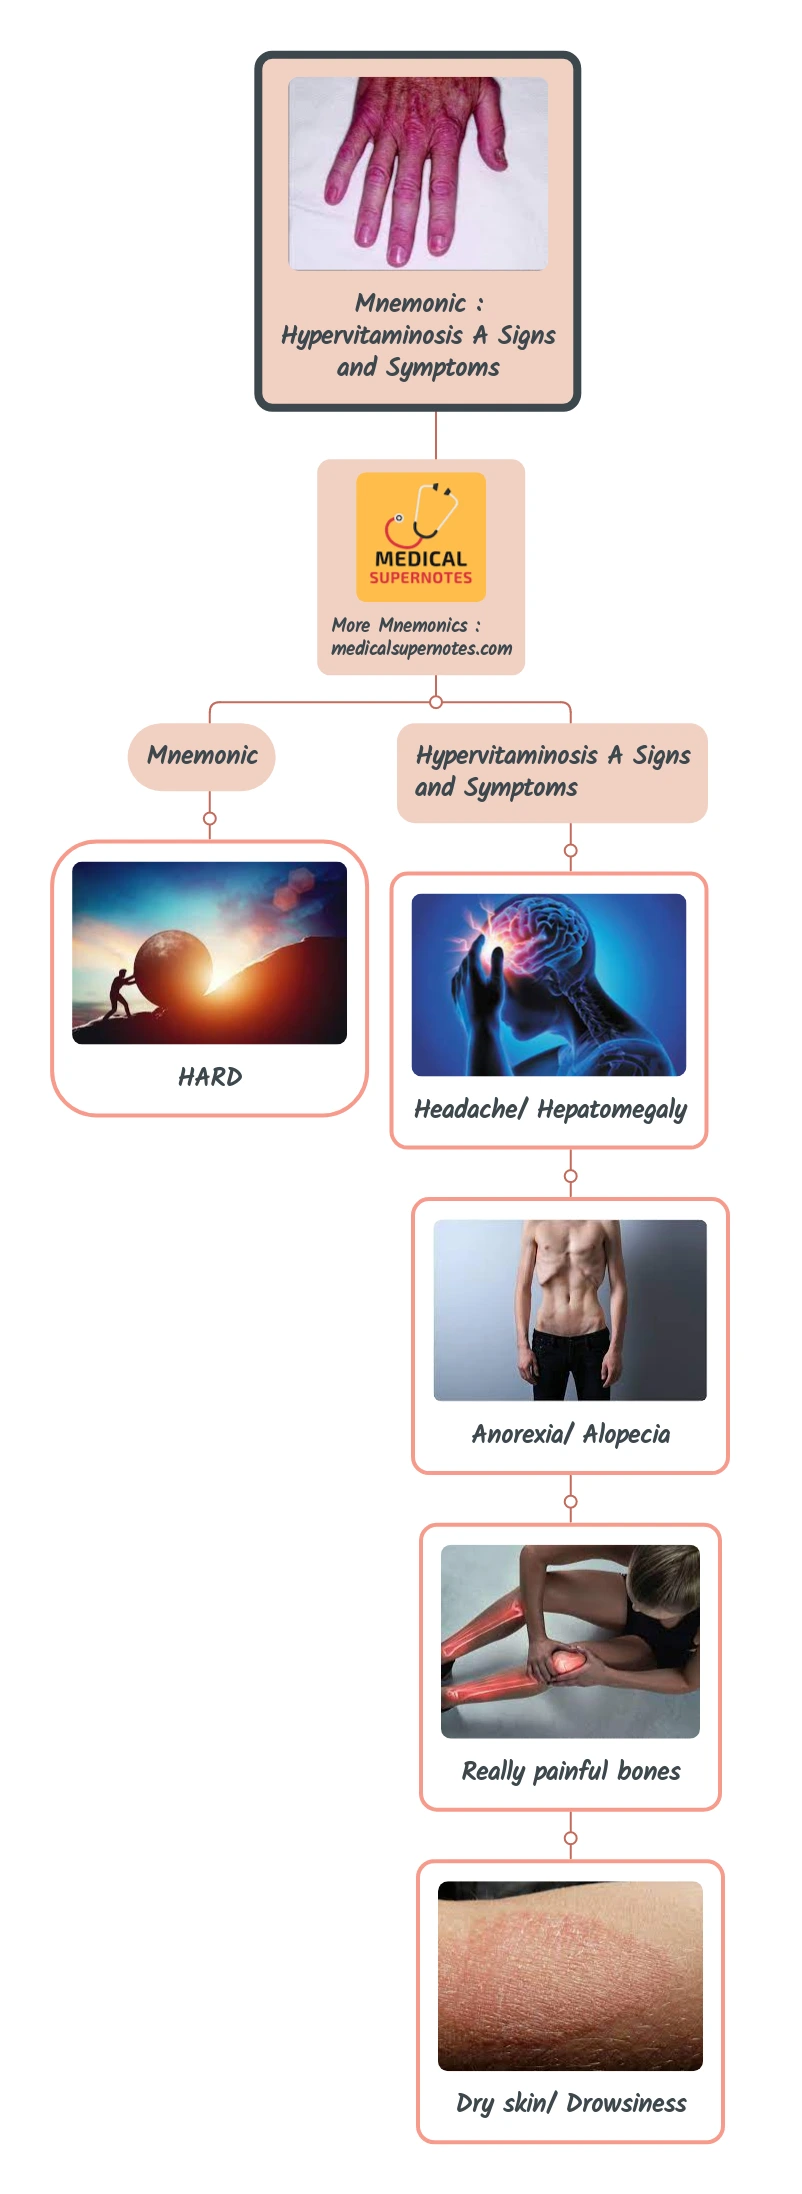 Mnemonic _ Hypervitaminosis A Signs and Symptoms